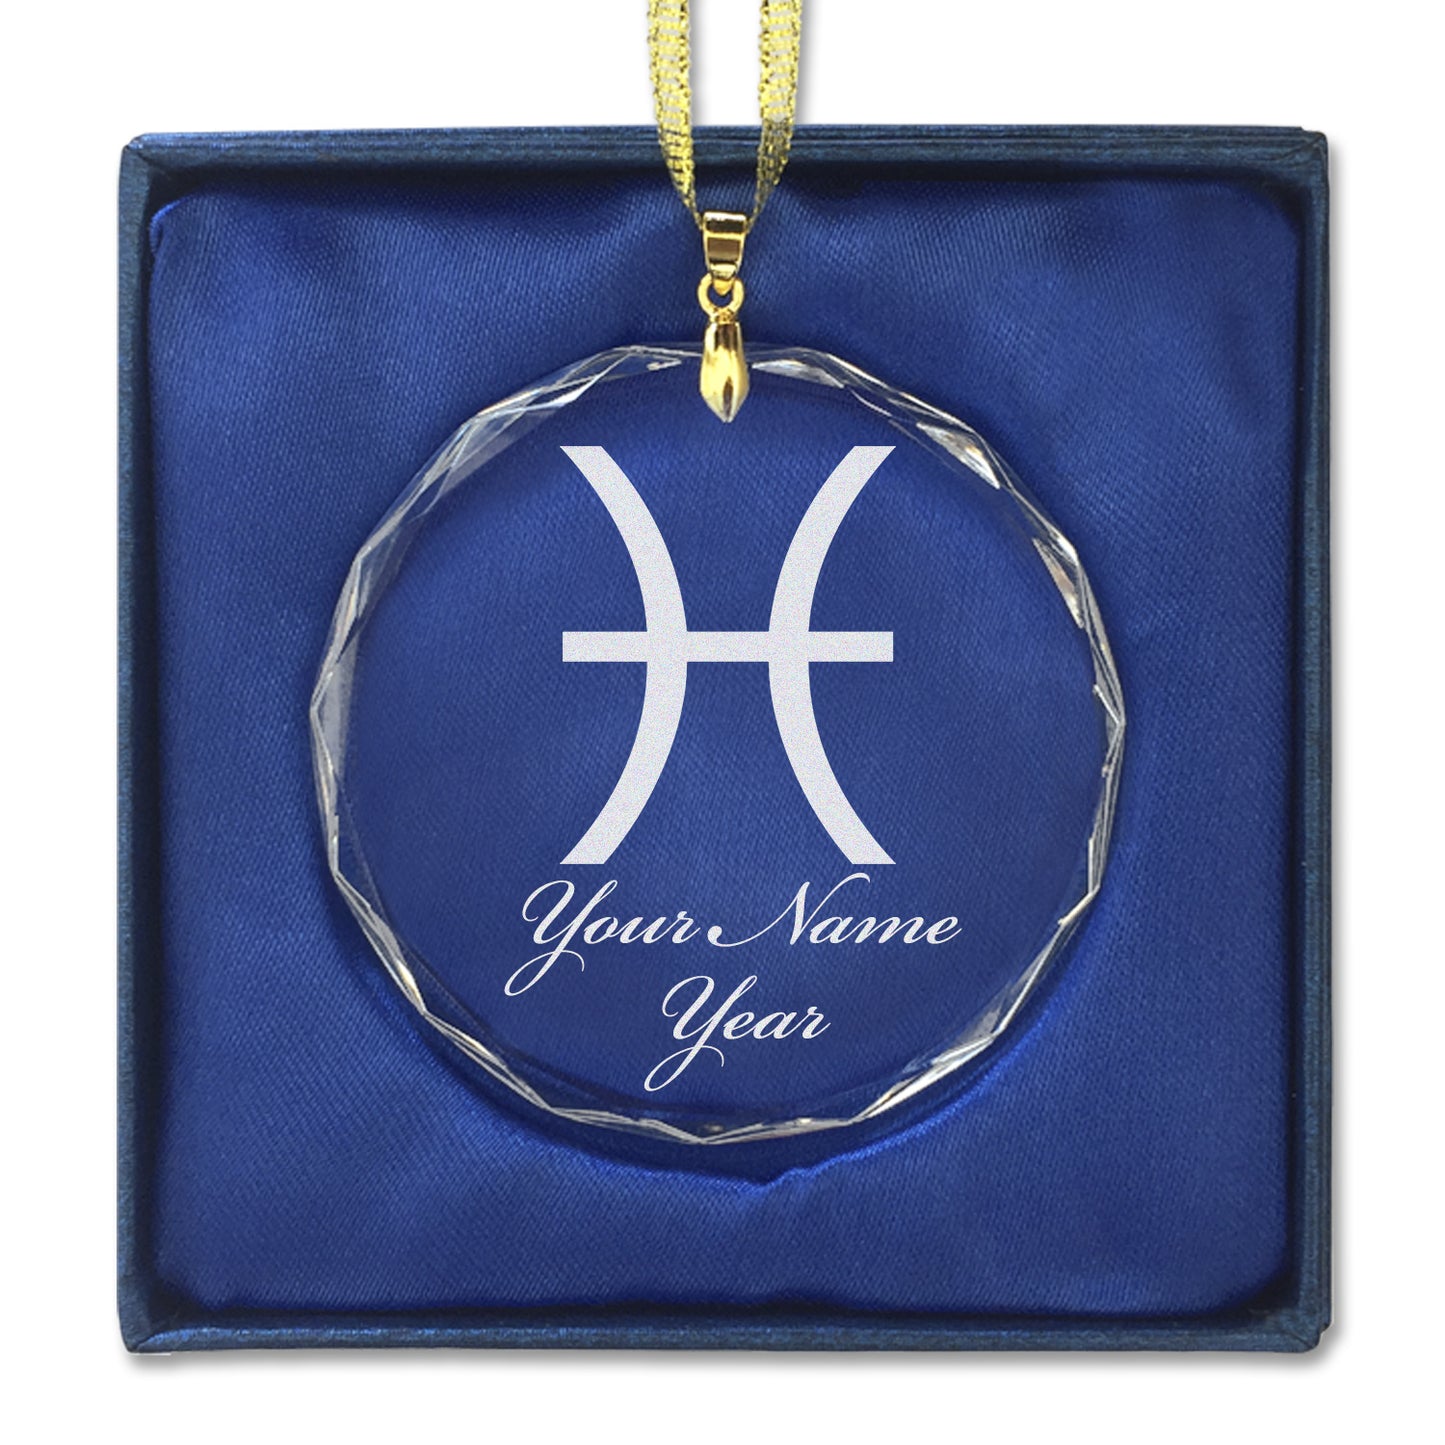 LaserGram Christmas Ornament, Zodiac Sign Pisces, Personalized Engraving Included (Round Shape)